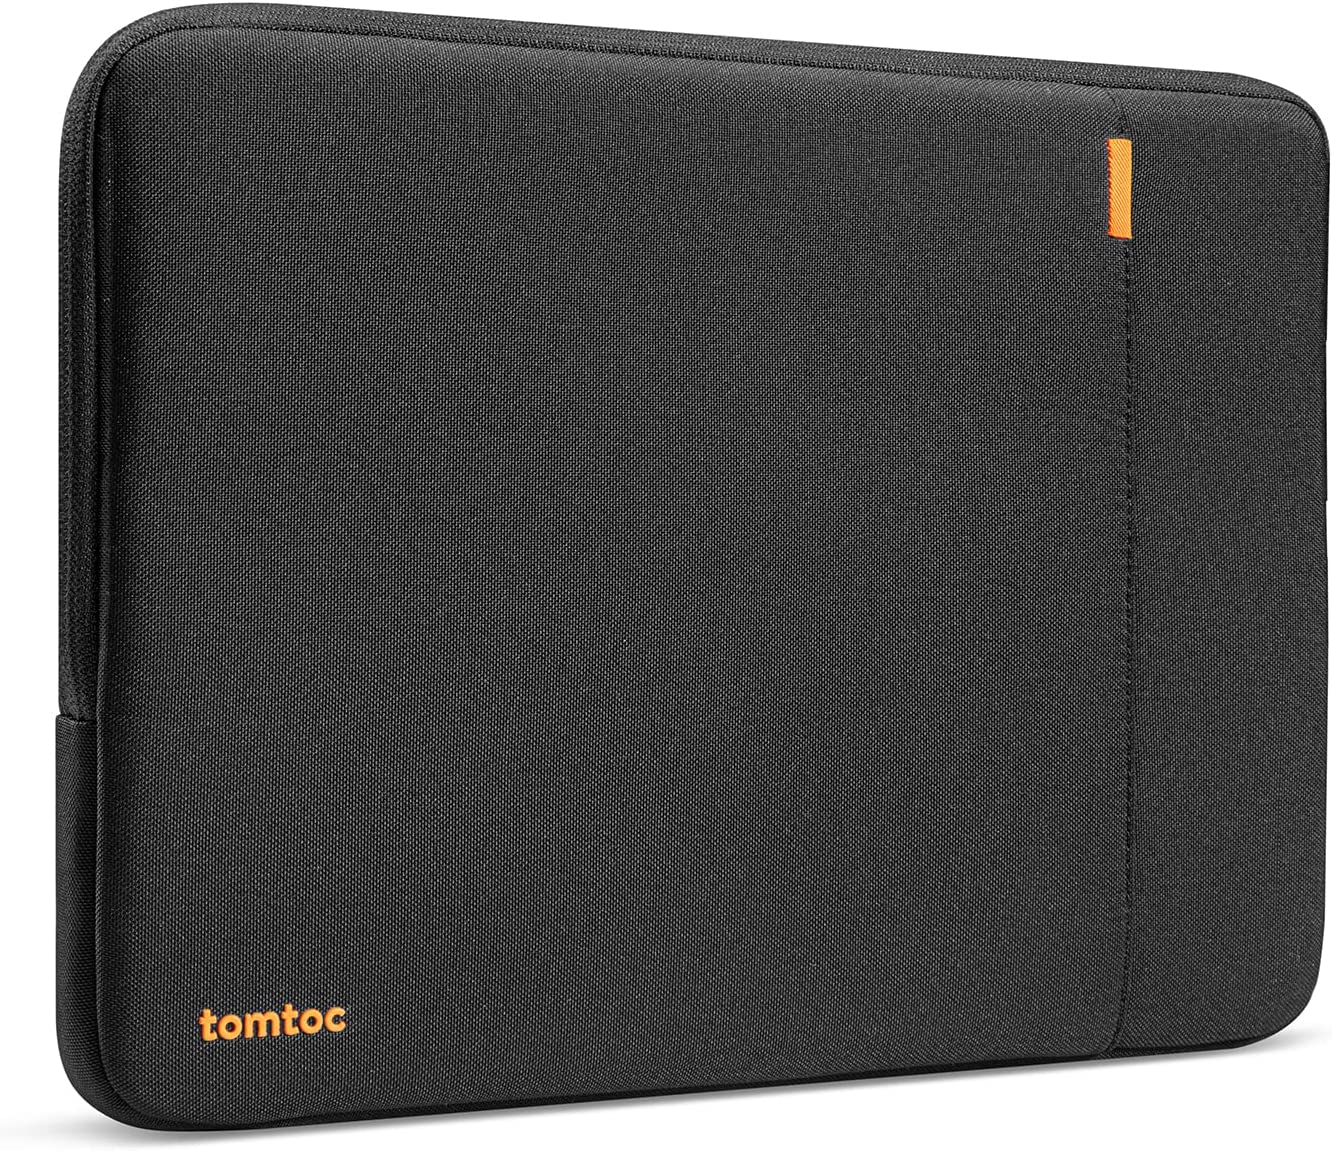 Tomtoc Defender-A13 Laptop Sleeve for 15.6 inch - Black